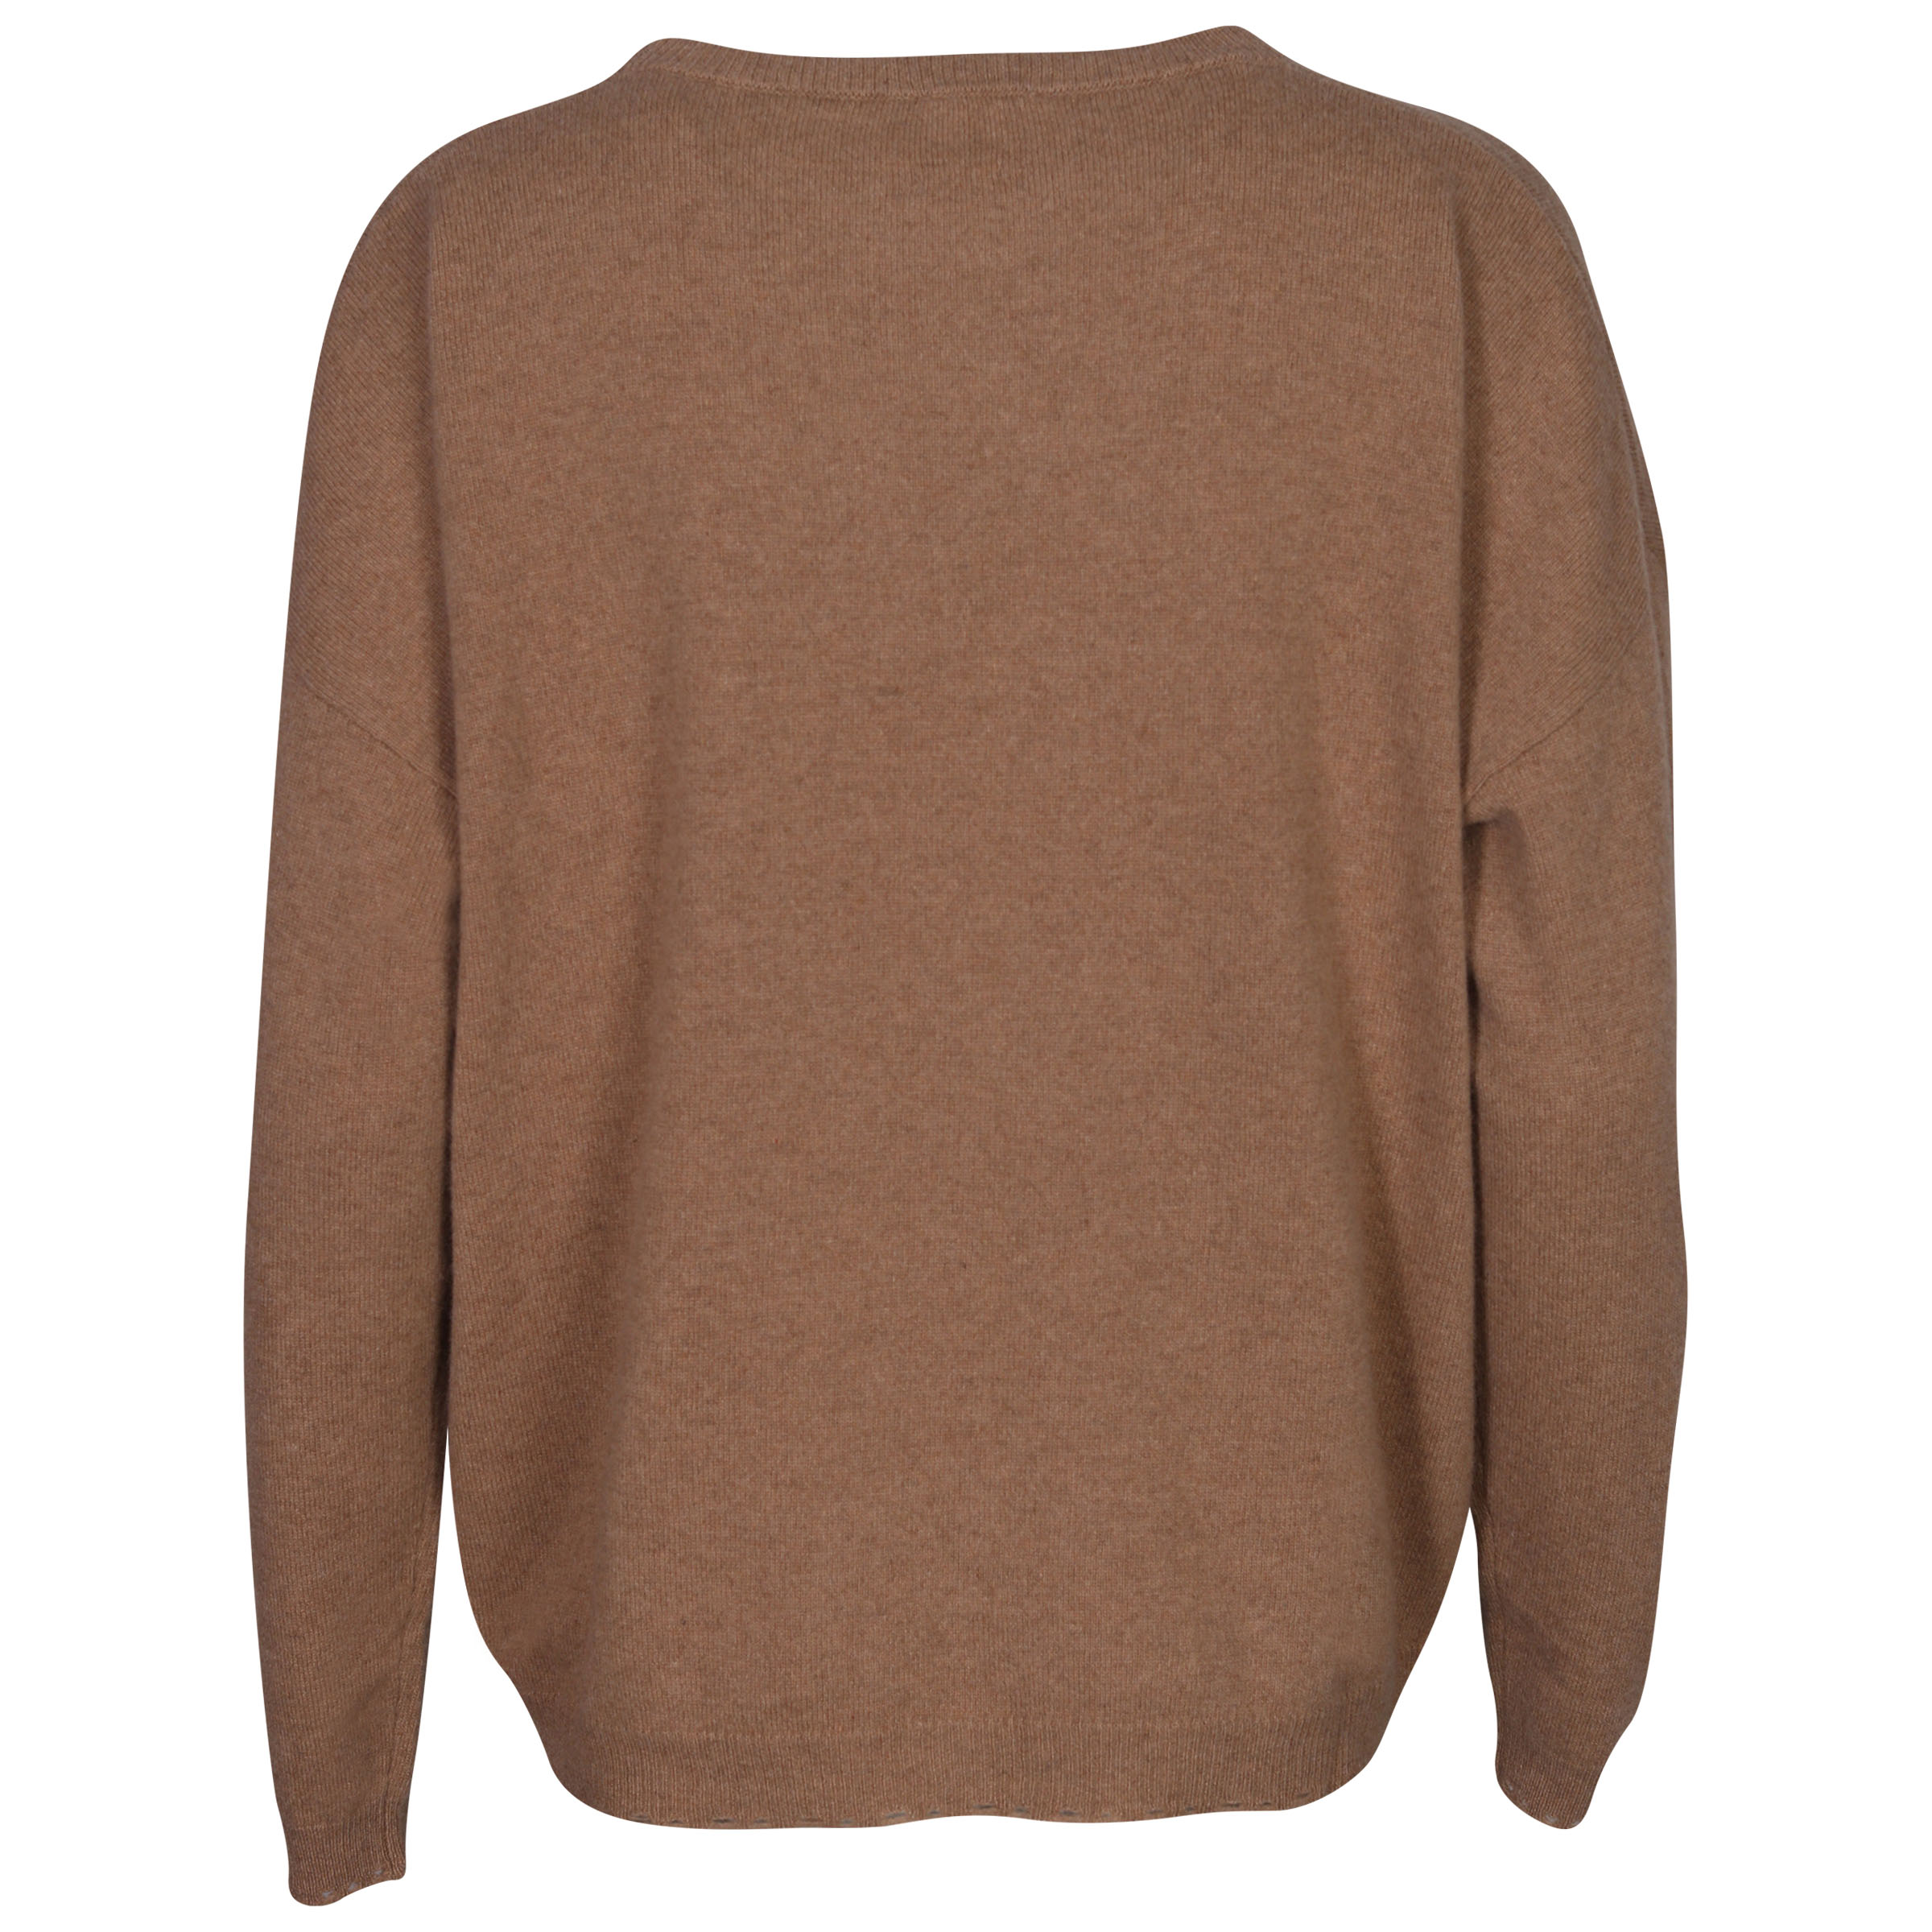 Phiili Recycled Cashmere Sweater in Camel XS/S